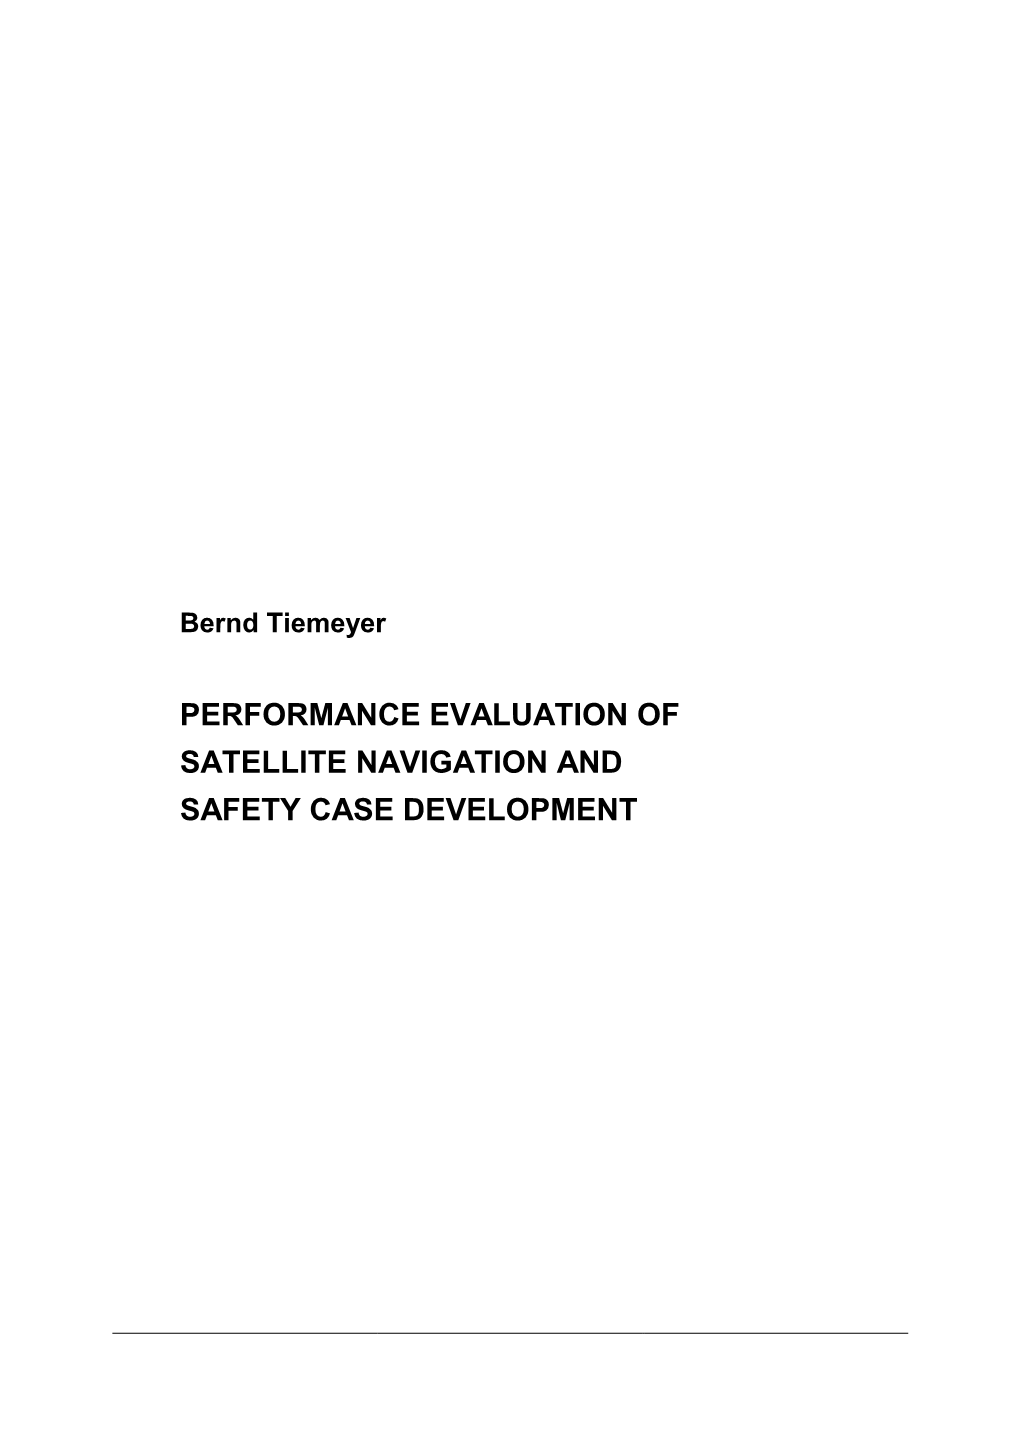 Performance Evaluation of Satellite Navigation and Safety Case Development